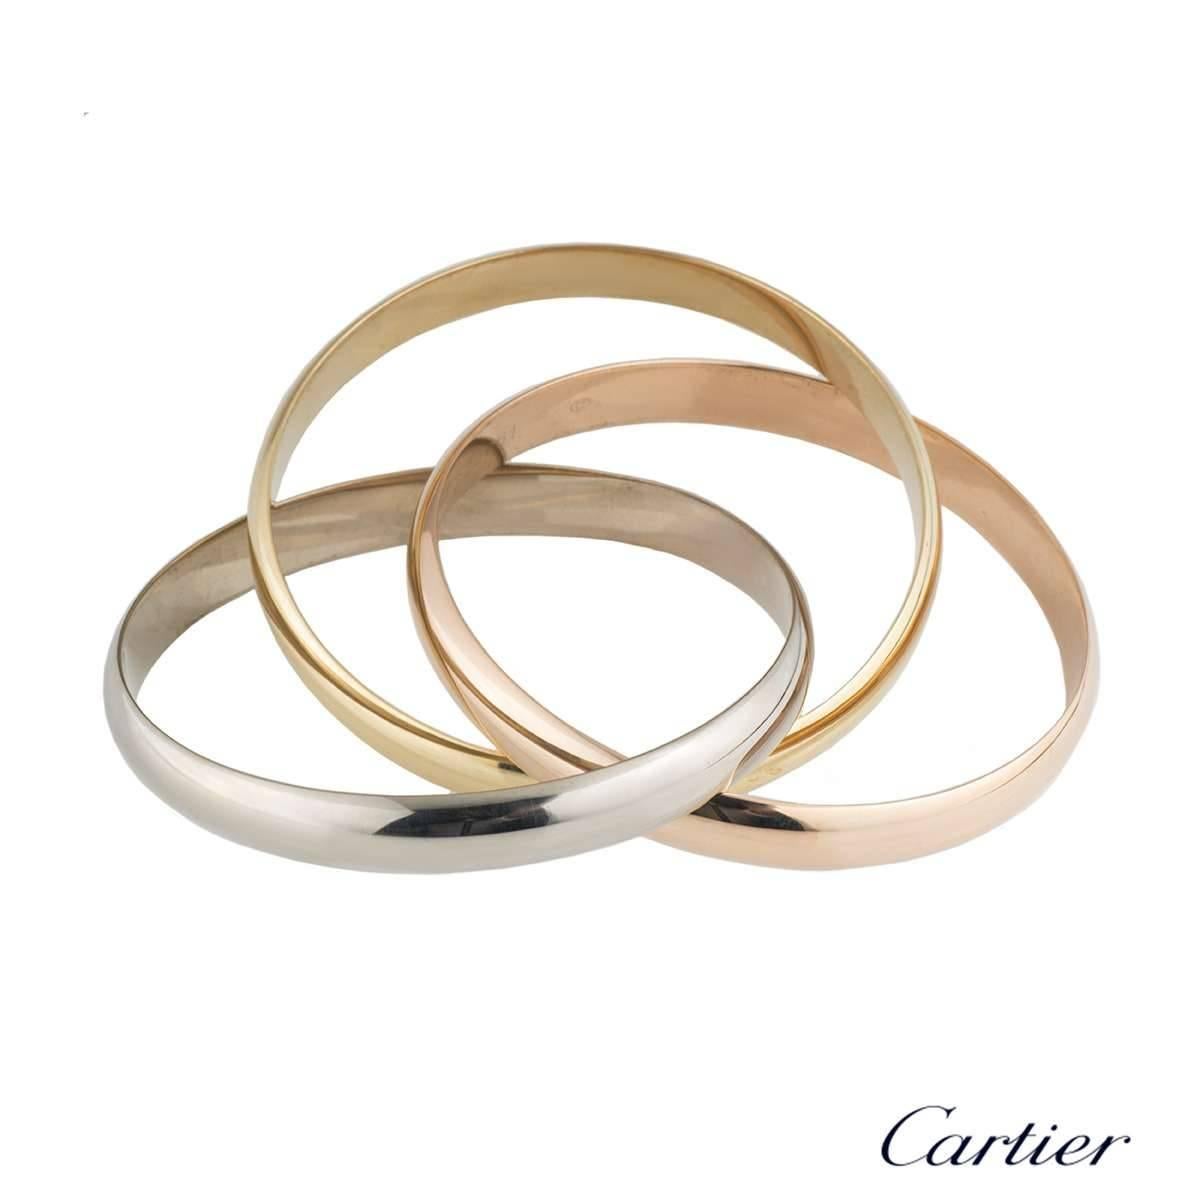 An iconic 18k three colour gold Cartier bangle from the Trinity de Cartier collection. The bracelet is made up of three intertwined 18k rose, white and yellow gold 9mm bands. The bracelet is a large size and has a gross weight of 103.66 grams. 

The